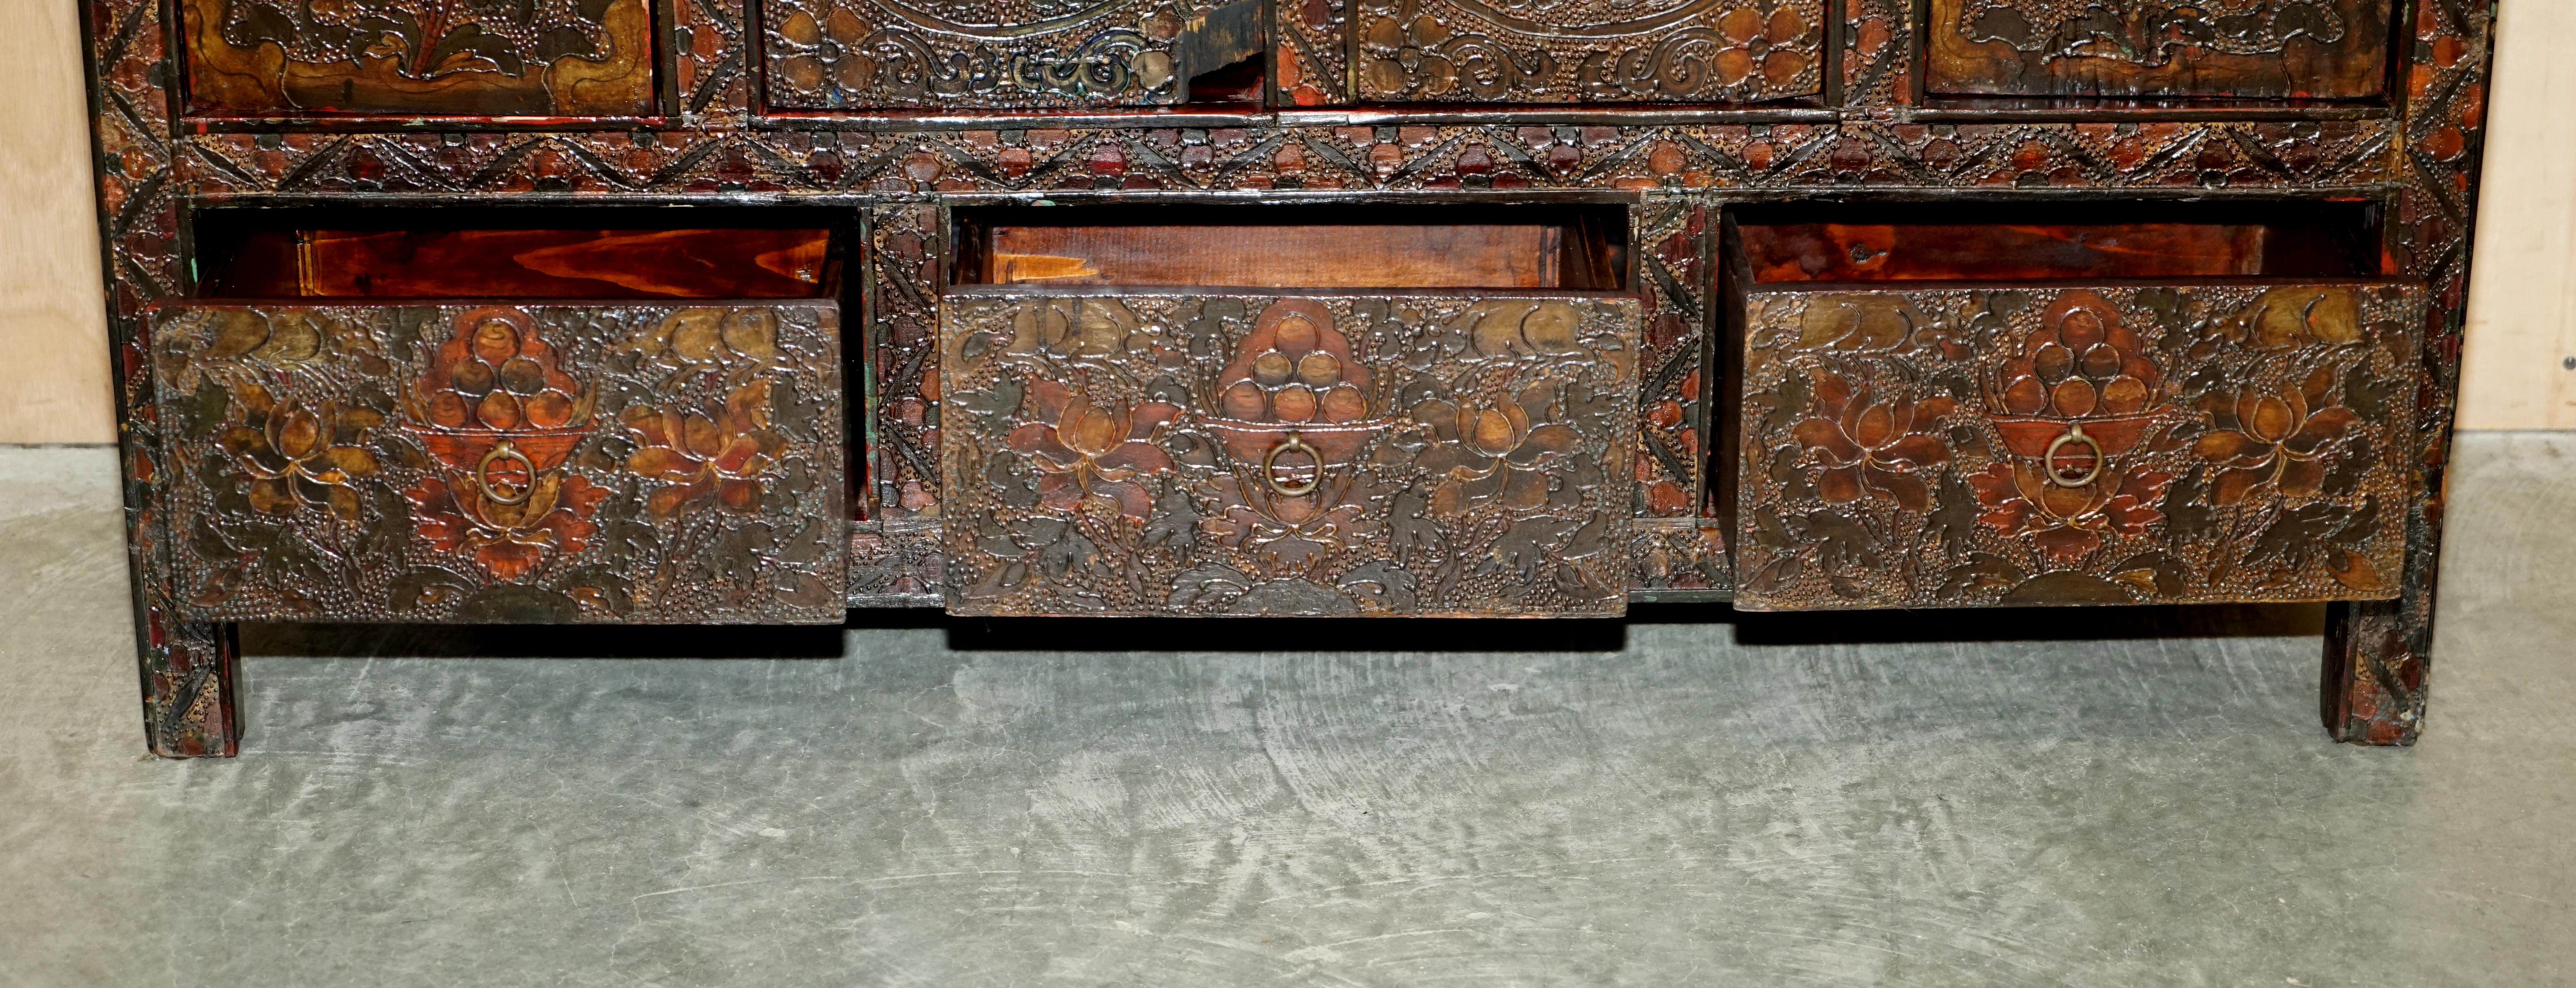 Antique Chinese Deer & Flower Tibetan Polychrome Painted Altar Cabinet Sideboard For Sale 12